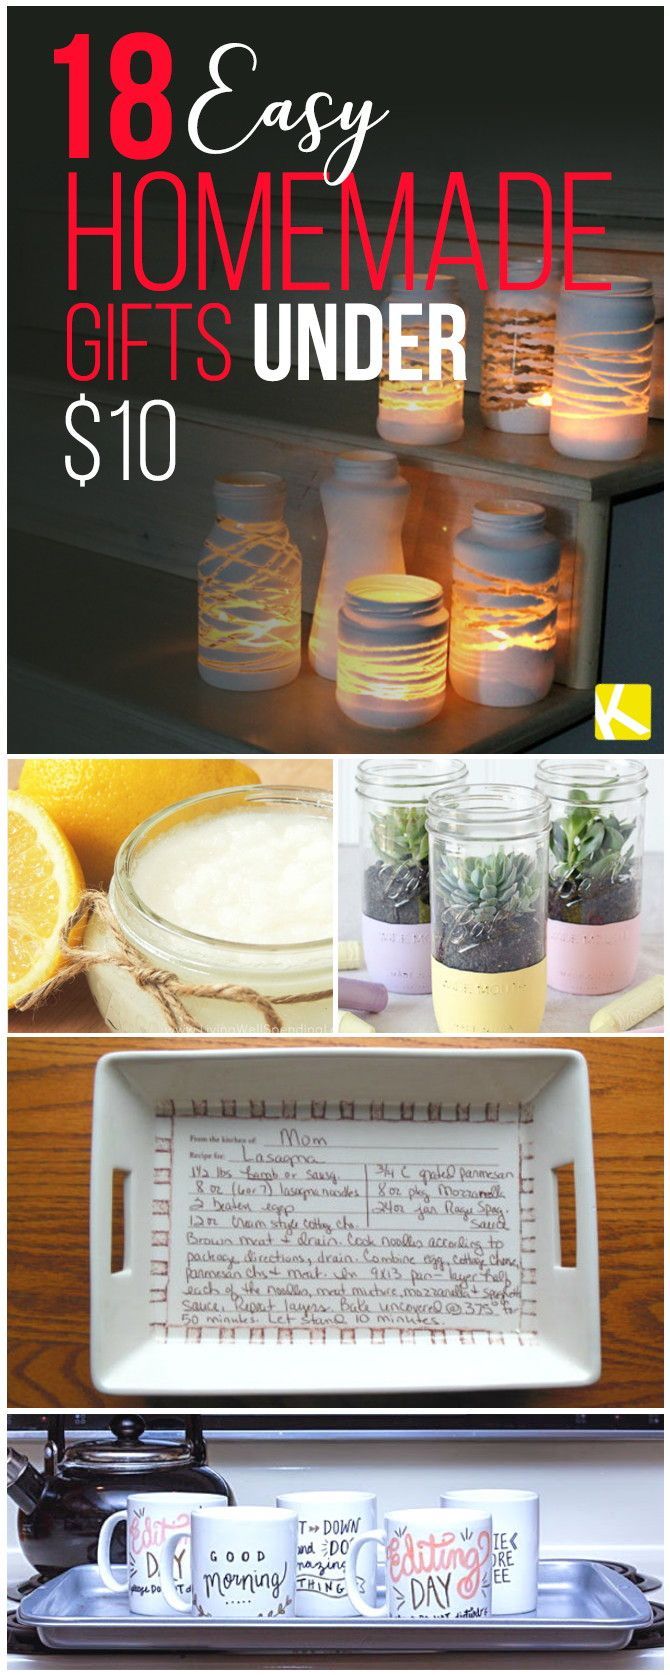 18 Easy Homemade Gifts Under $10 -   diy Gifts cheap